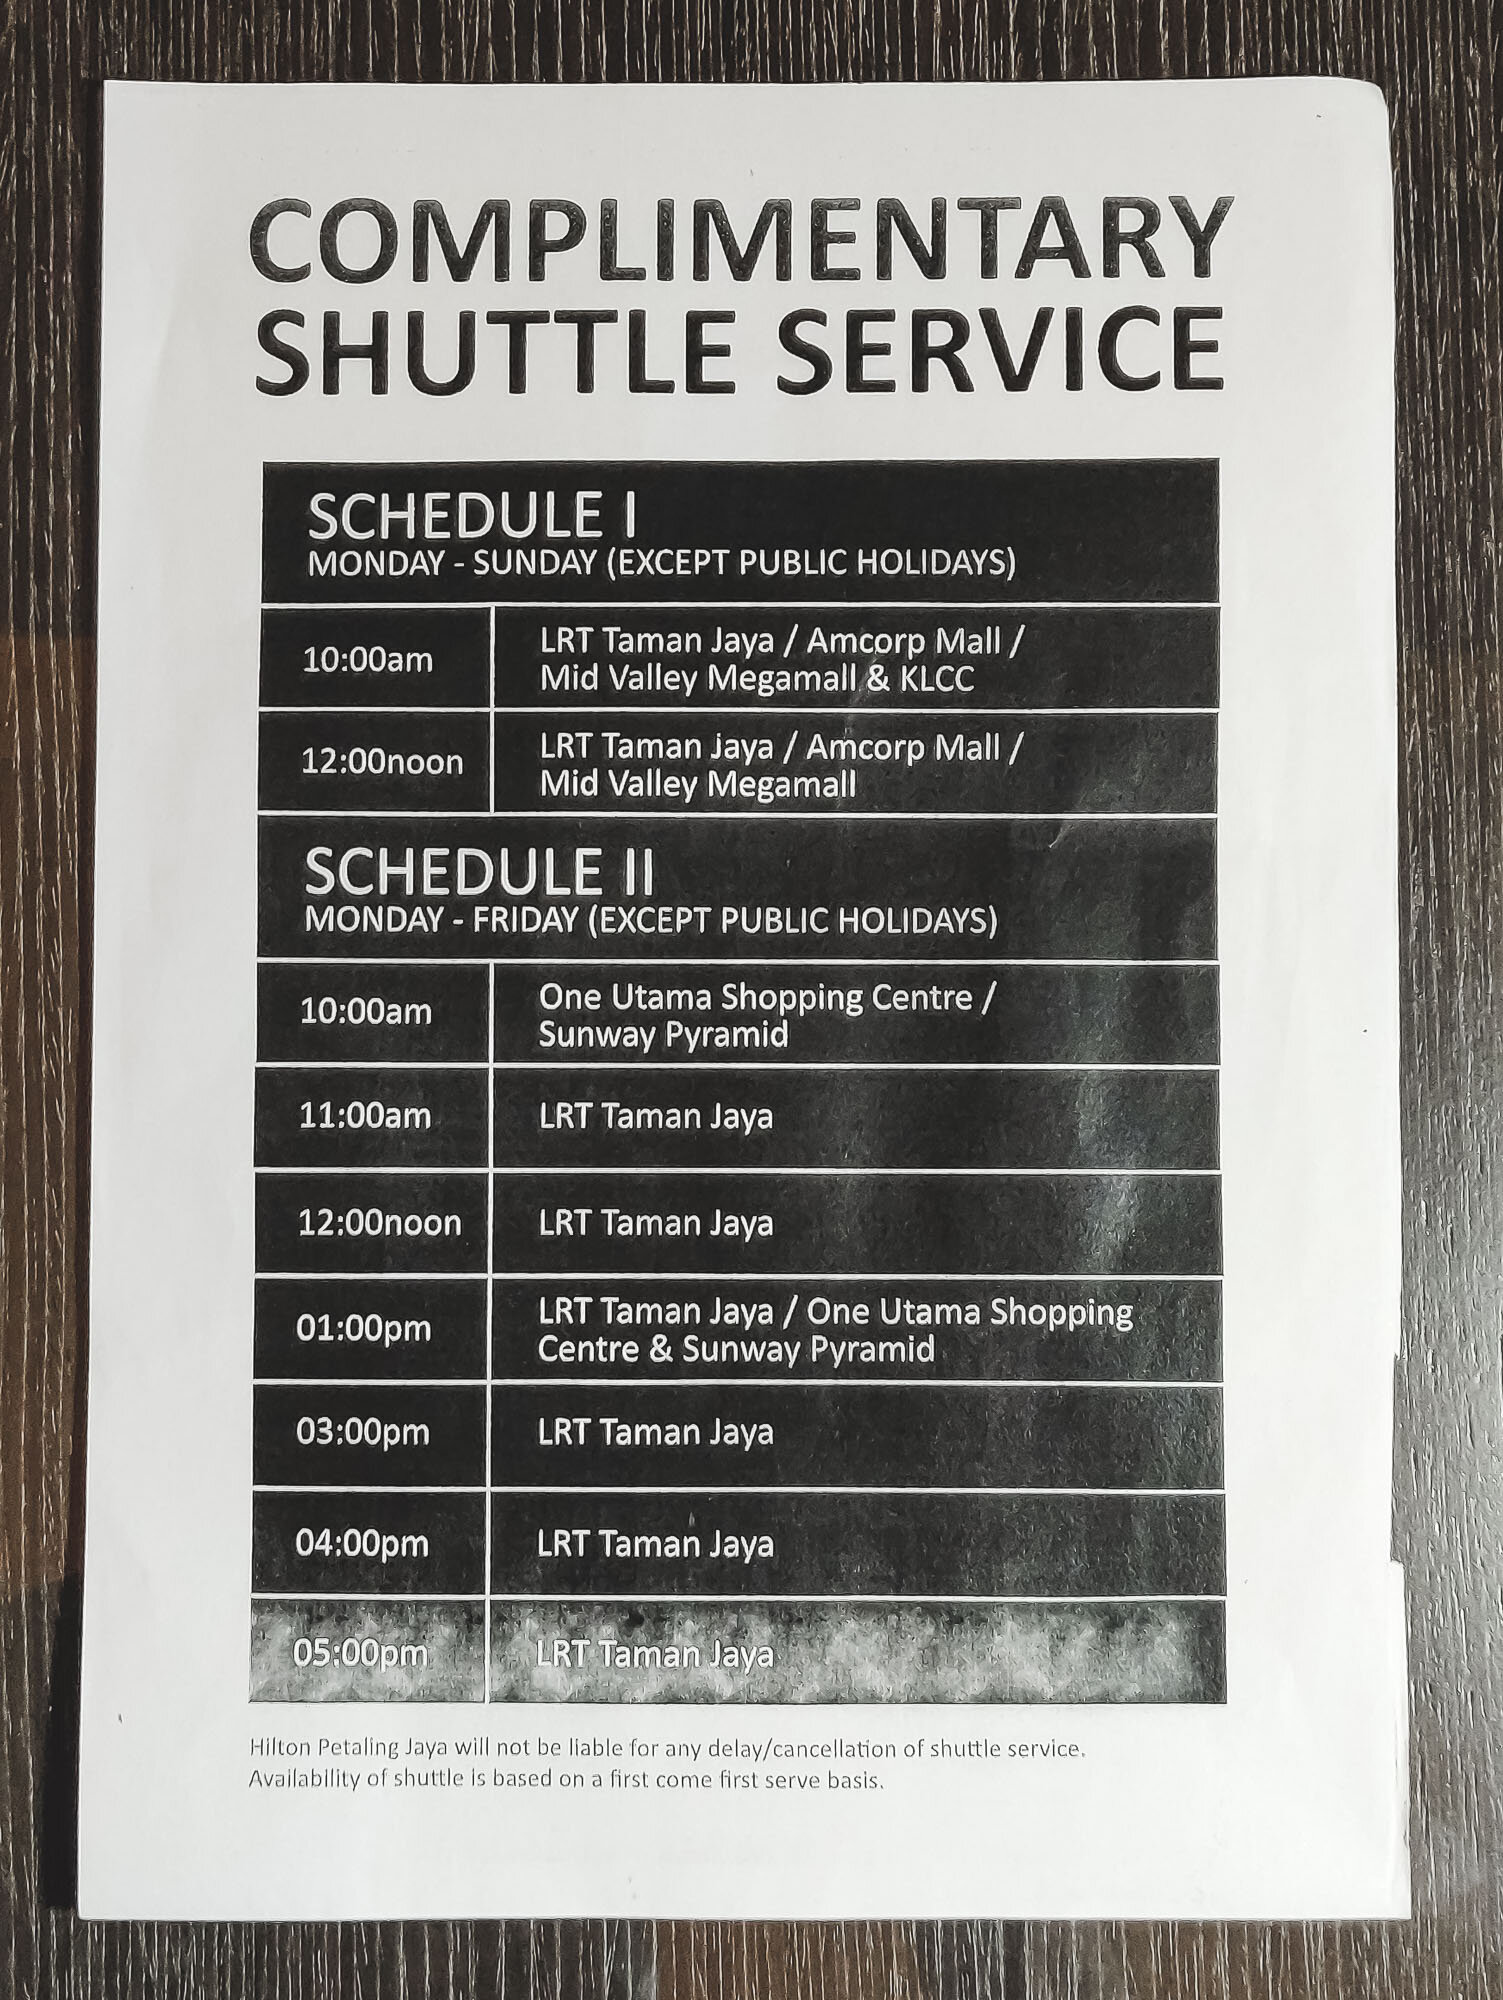 Schedule of the complimentary shuttle service